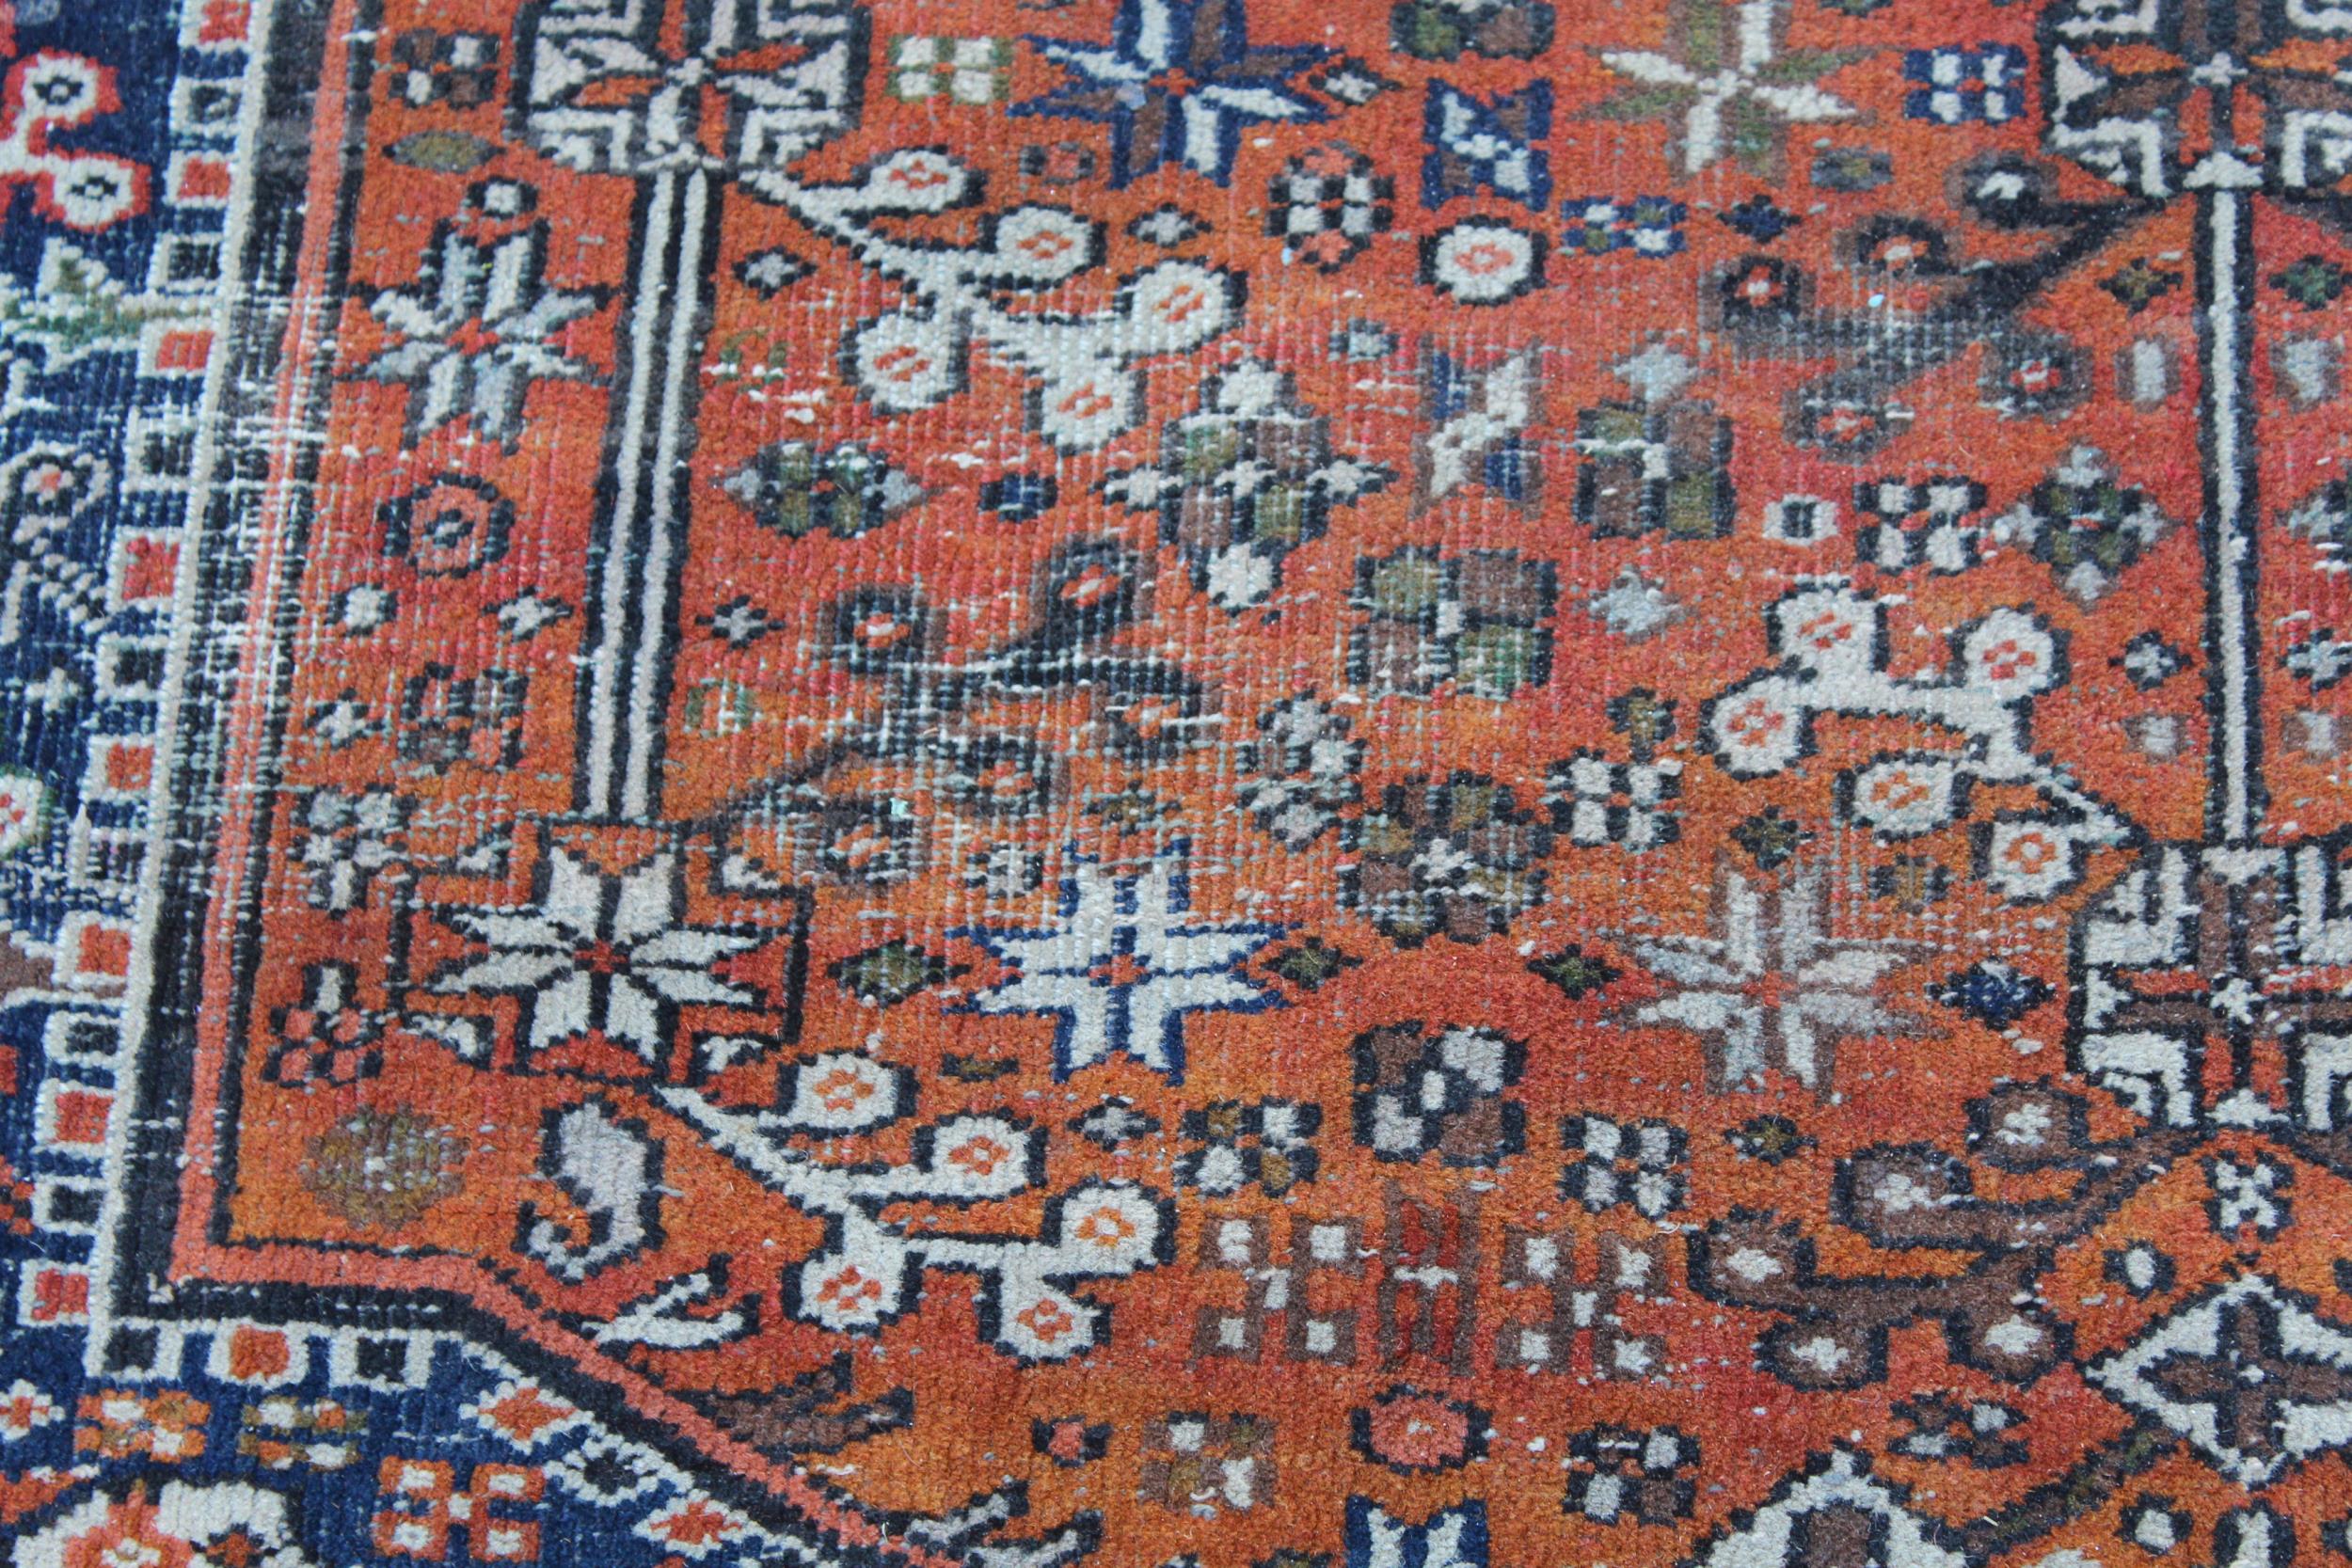 Qashqai rug of central floral medallion and all-over floral design with border, approximately - Image 3 of 4